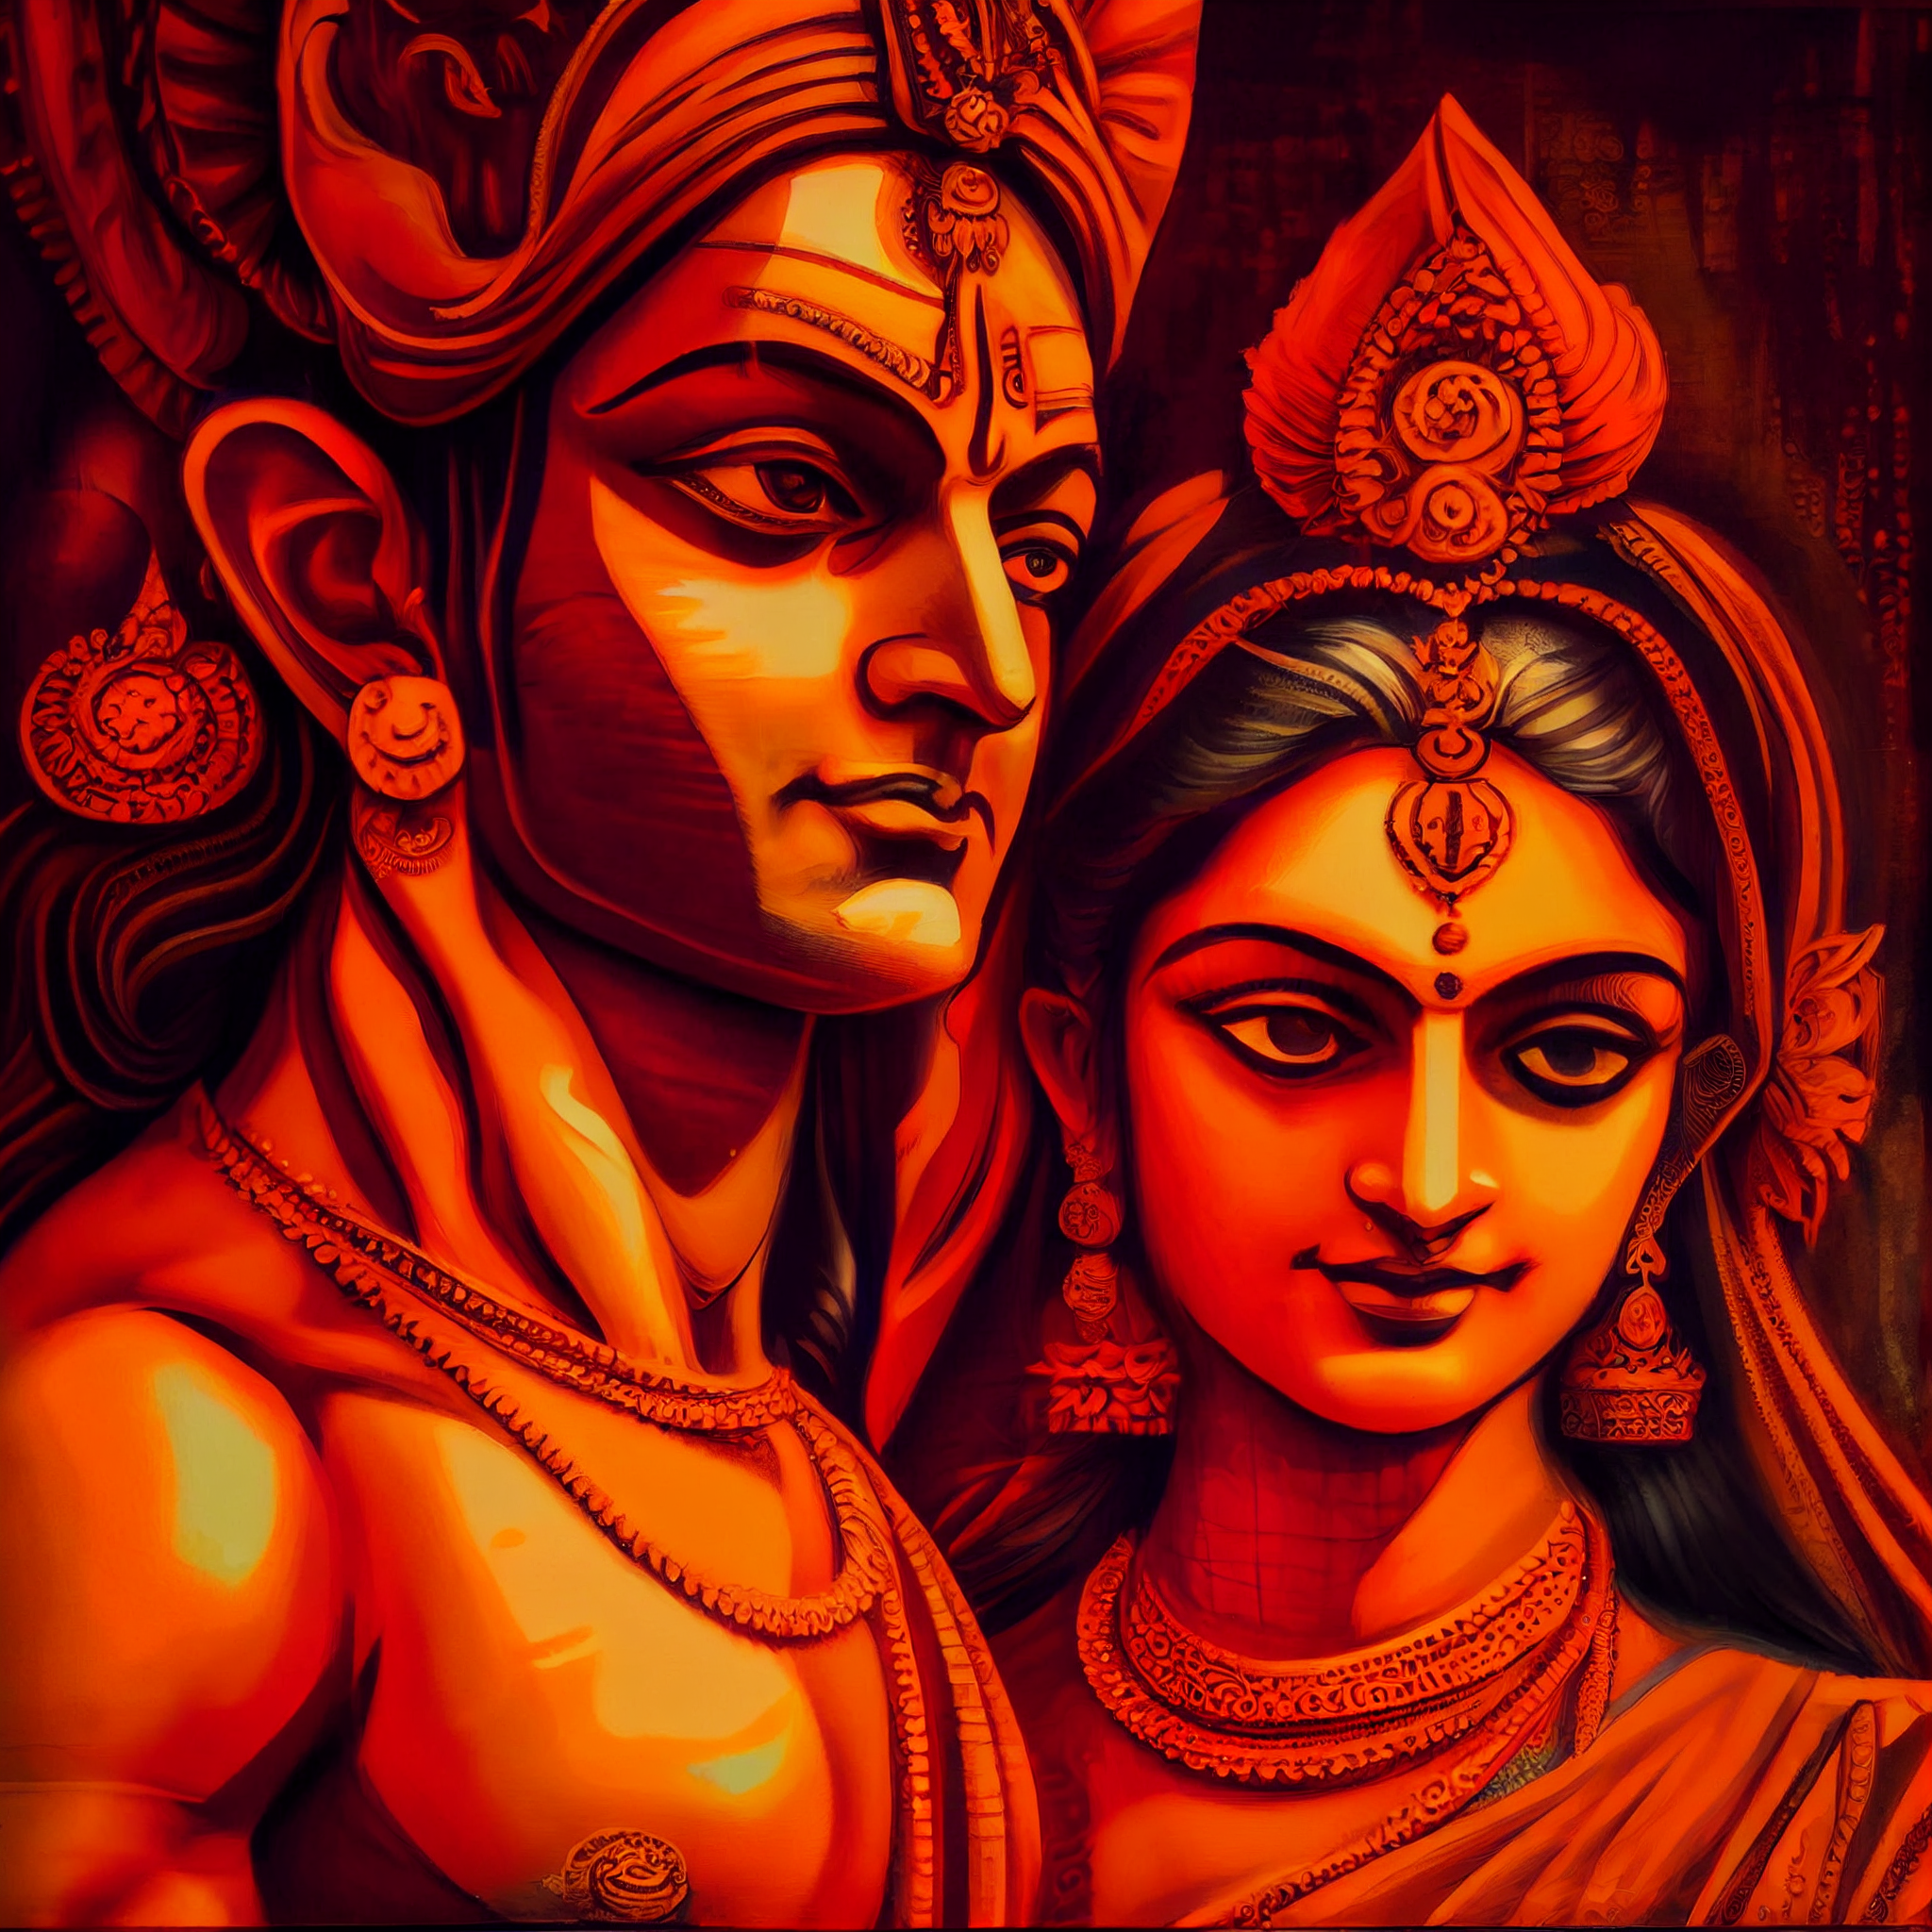 Divine Union: A Beautiful Modern Art Print of Lord Rama with Sita, Ideal for Home, Office, and Gifting